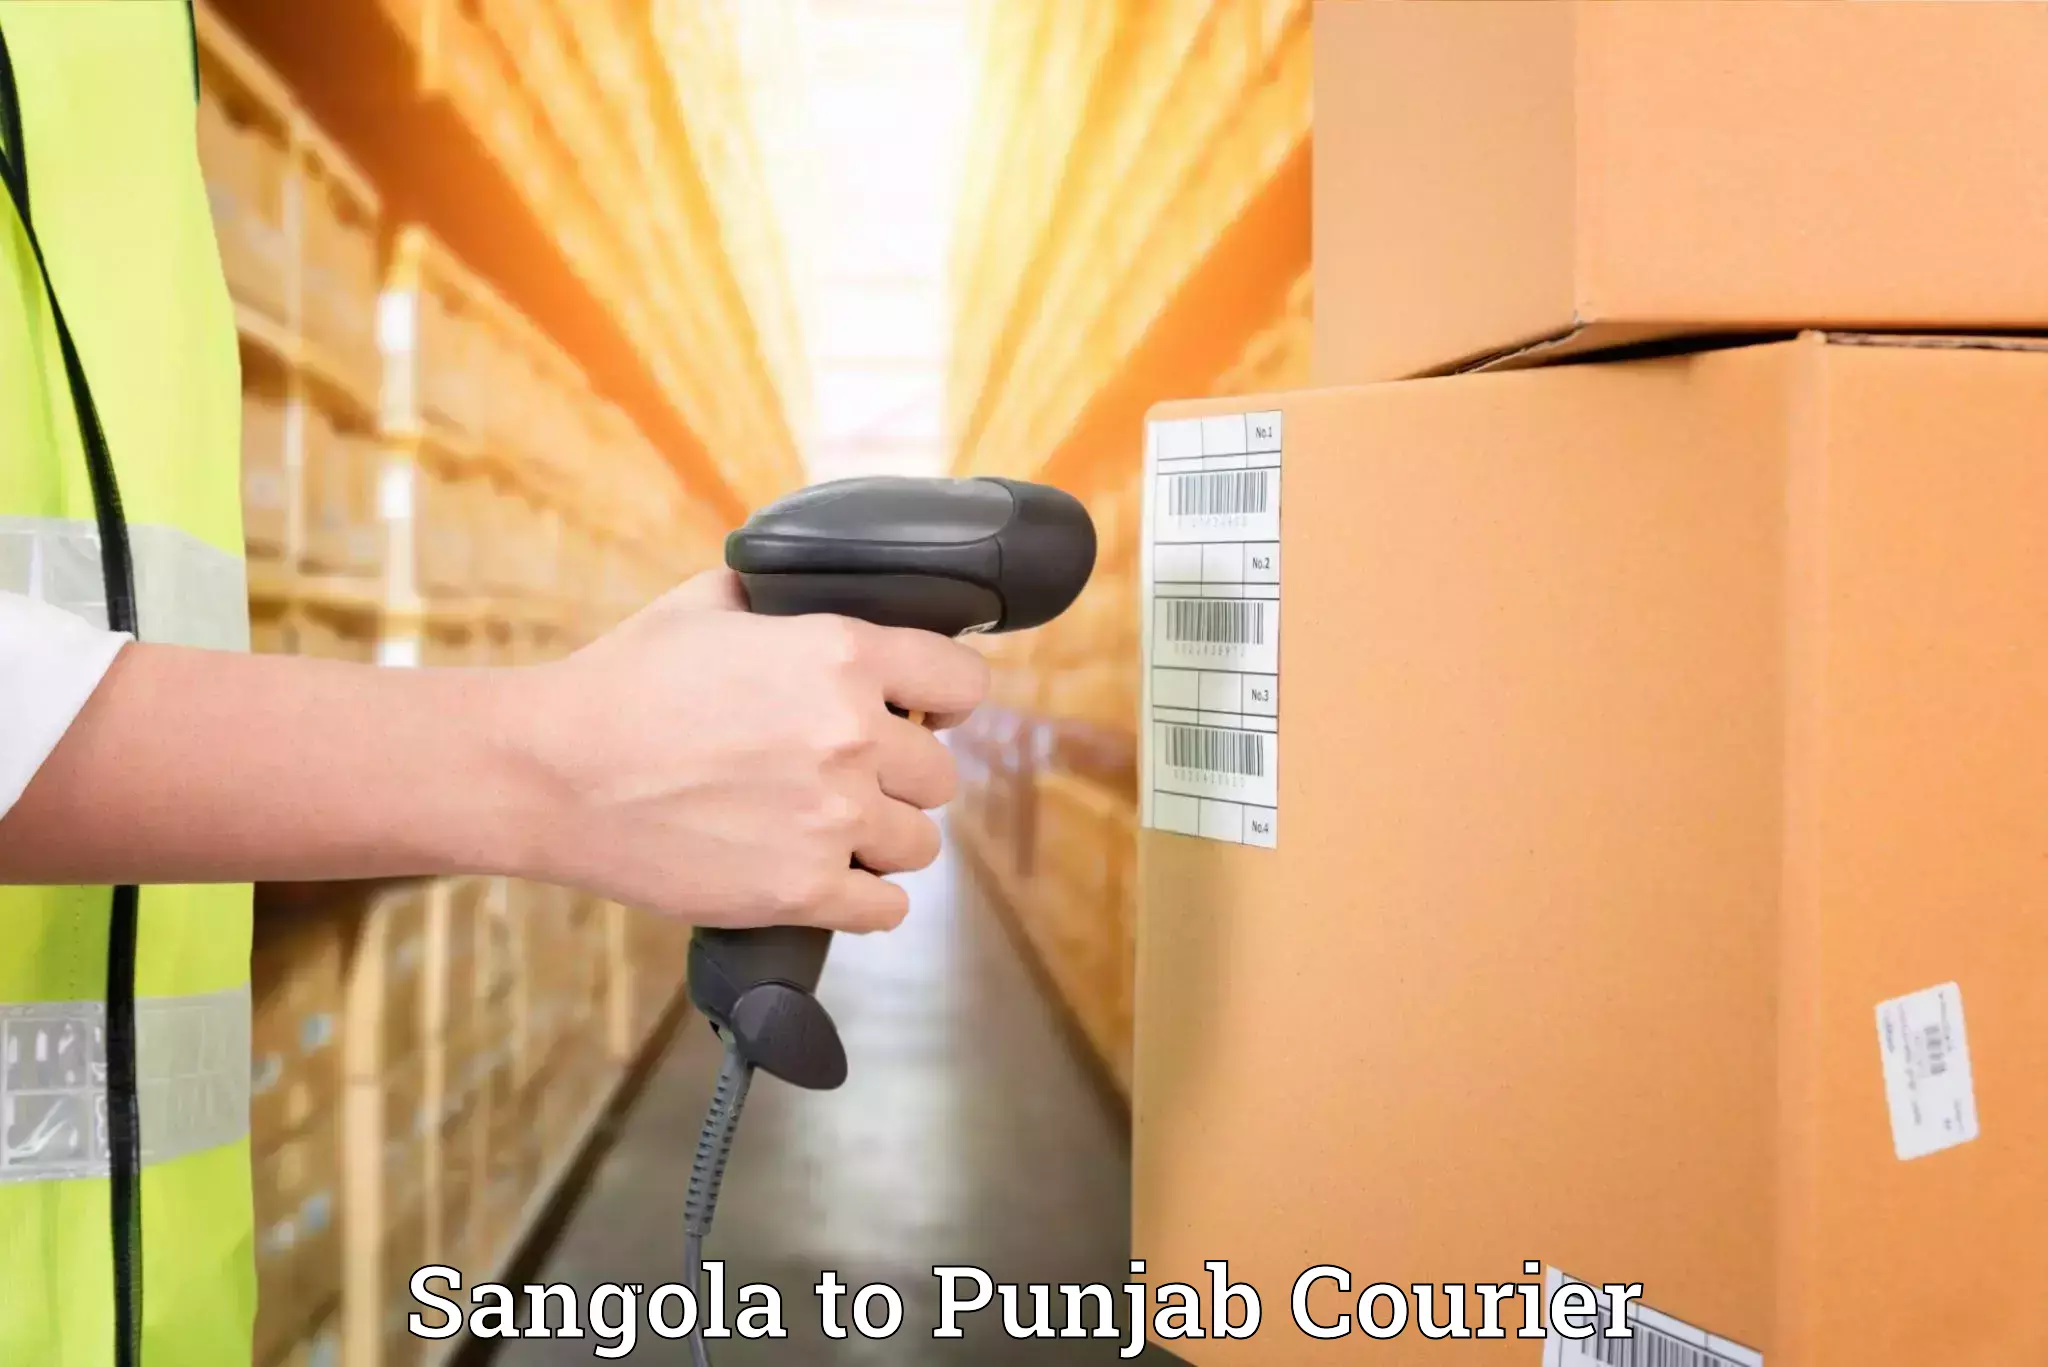 Quality moving and storage in Sangola to Punjab